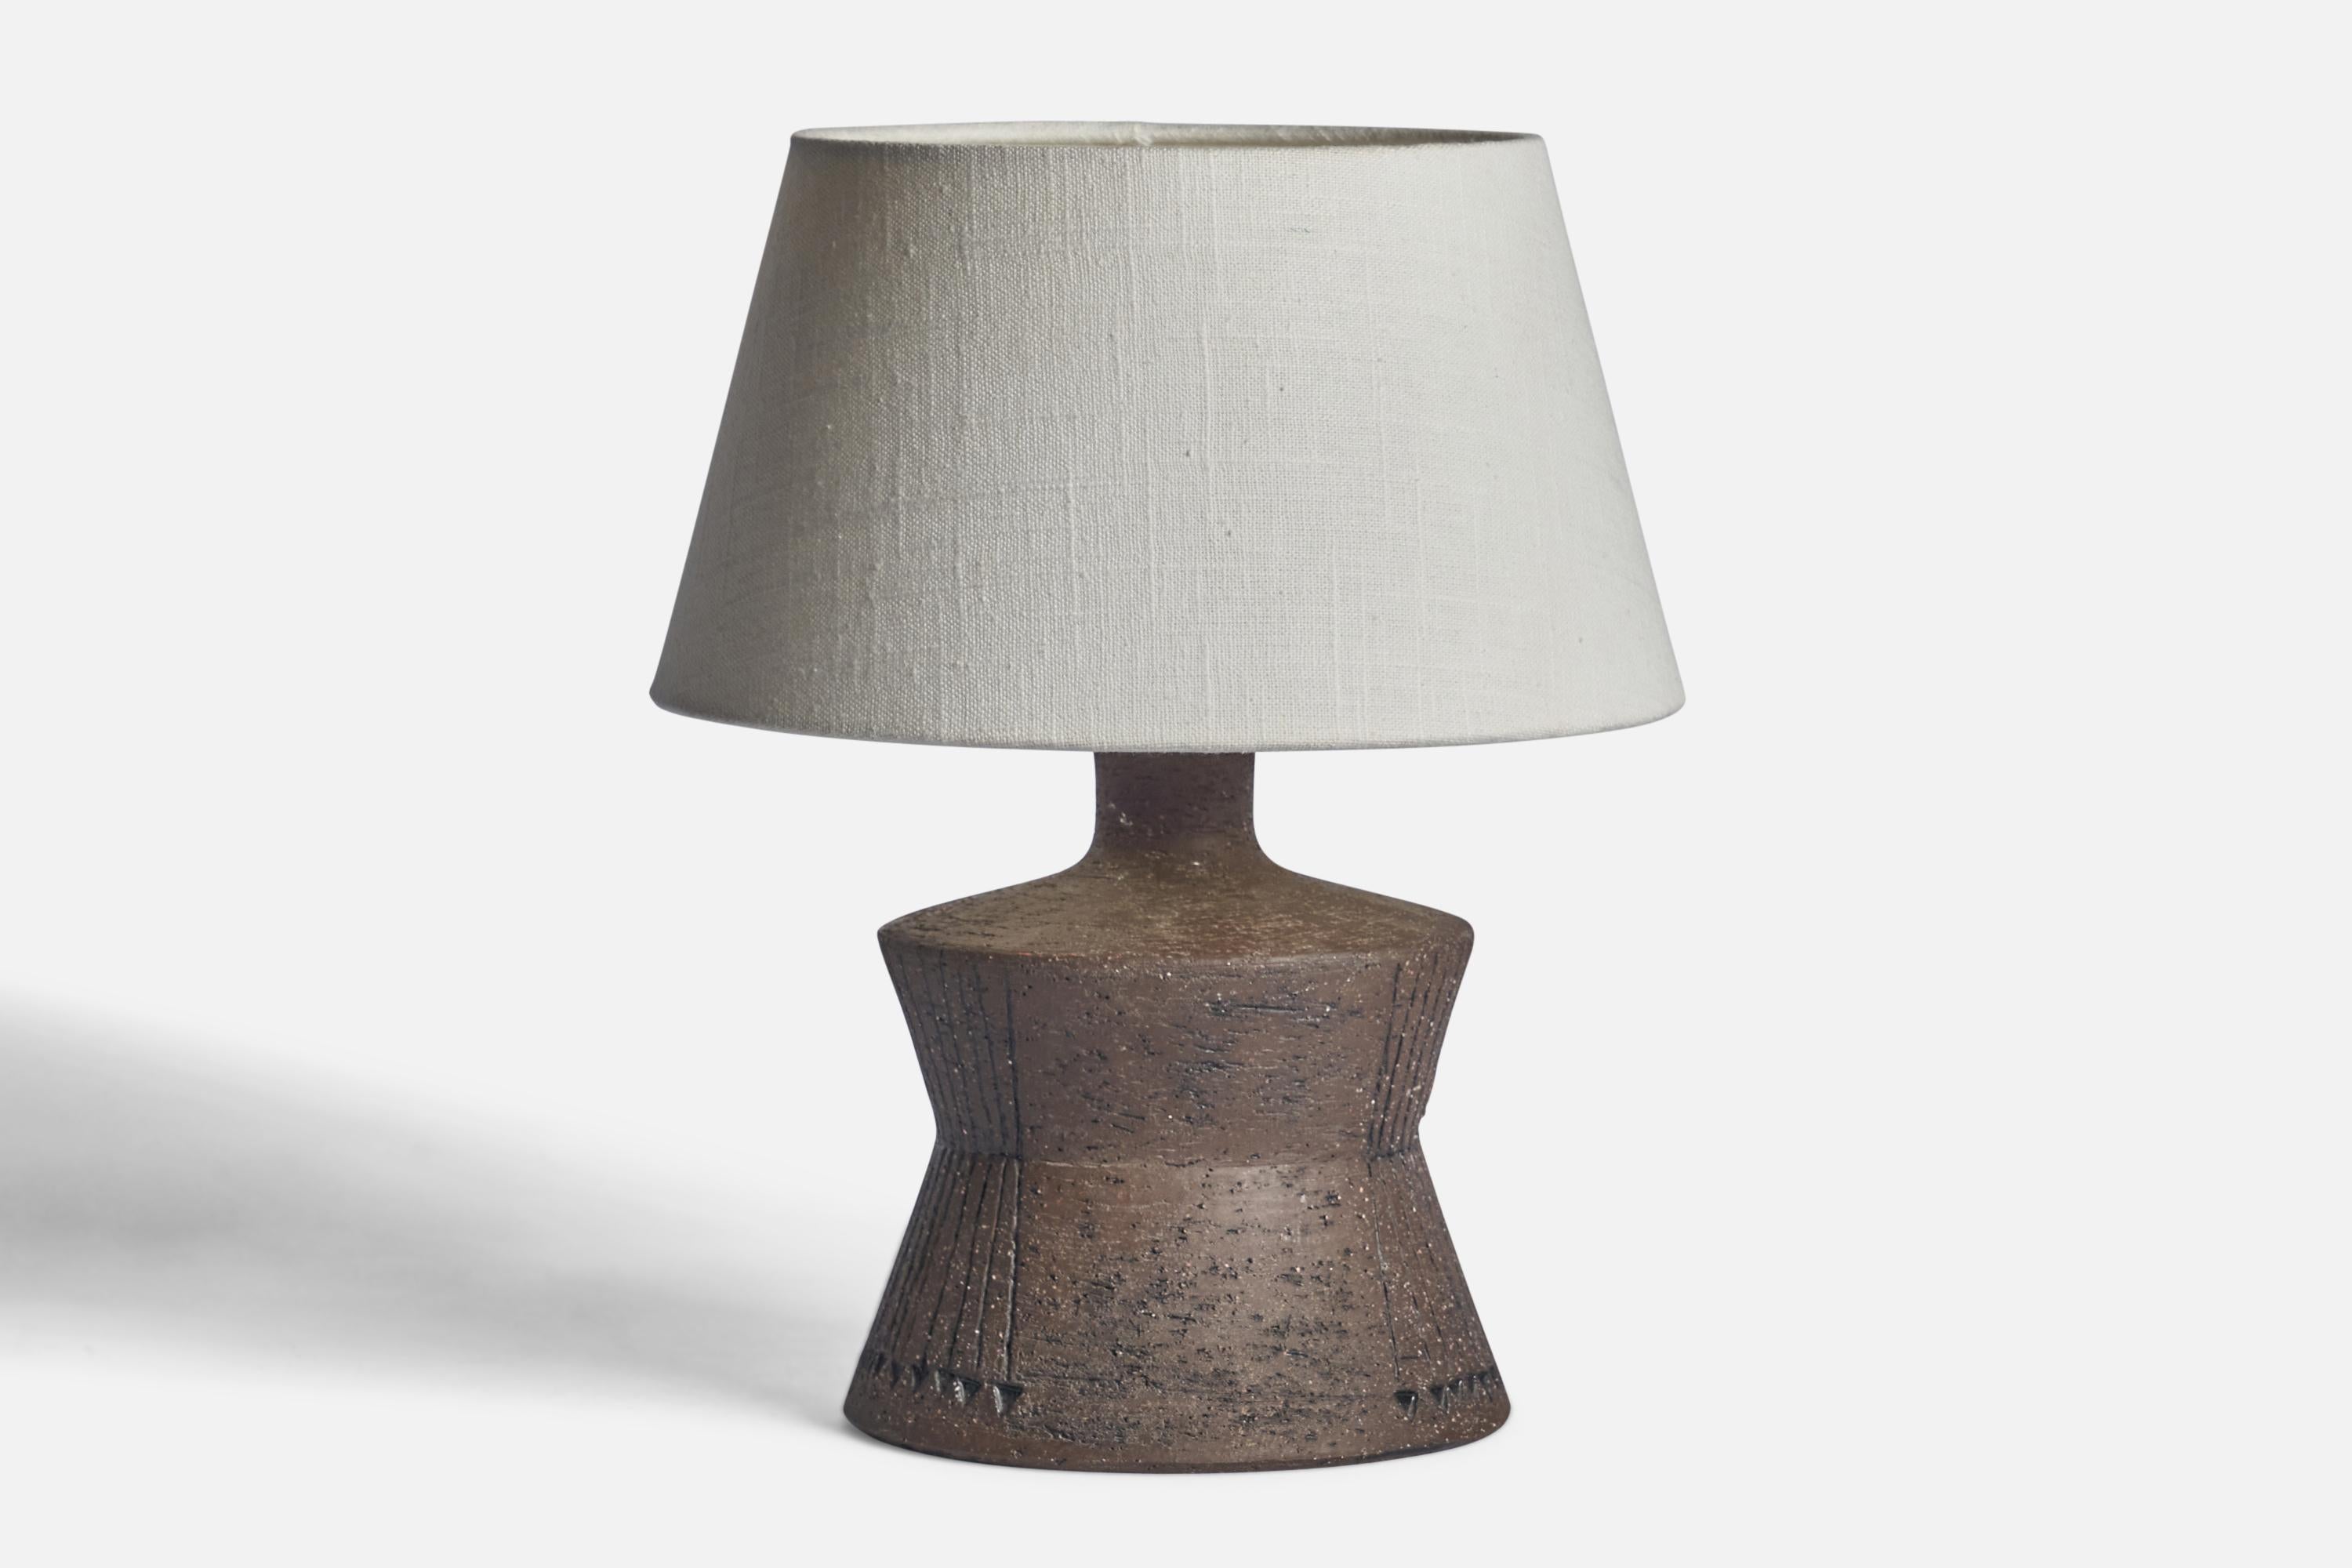 A grey-glazed incised stoneware table lamp designed and produced in Sweden, 1970s.

Dimensions of Lamp (inches): 9.25” H x 6.4” Diameter
Dimensions of Shade (inches): 7” Top Diameter x 10” Bottom Diameter x 5.5” H 
Dimensions of Lamp with Shade